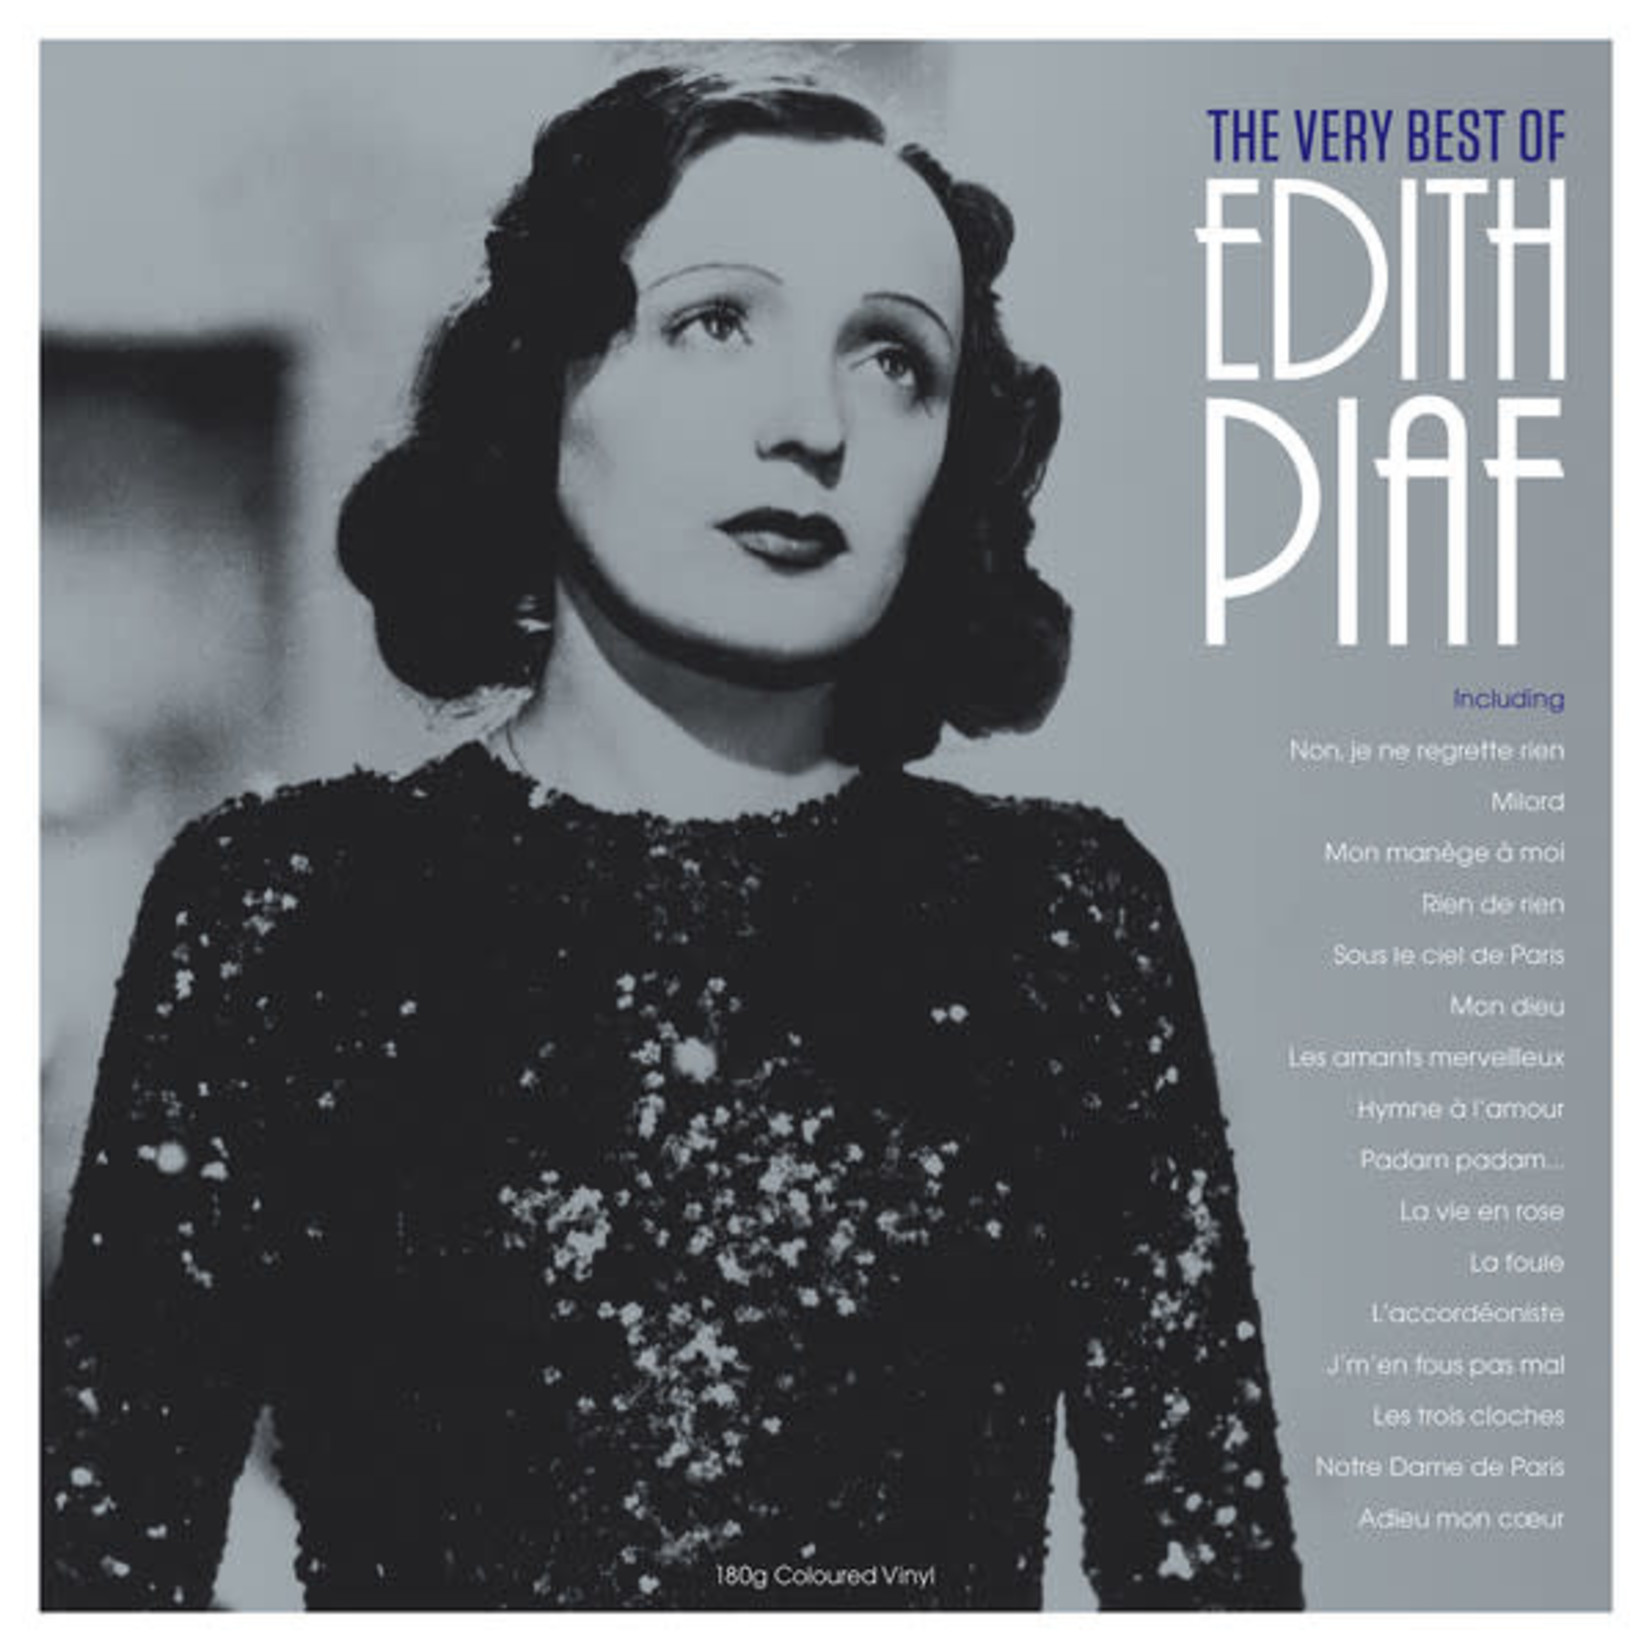 [New] Piaf, Edith: The Very Best Of (clear vinyl) [NOT NOW]